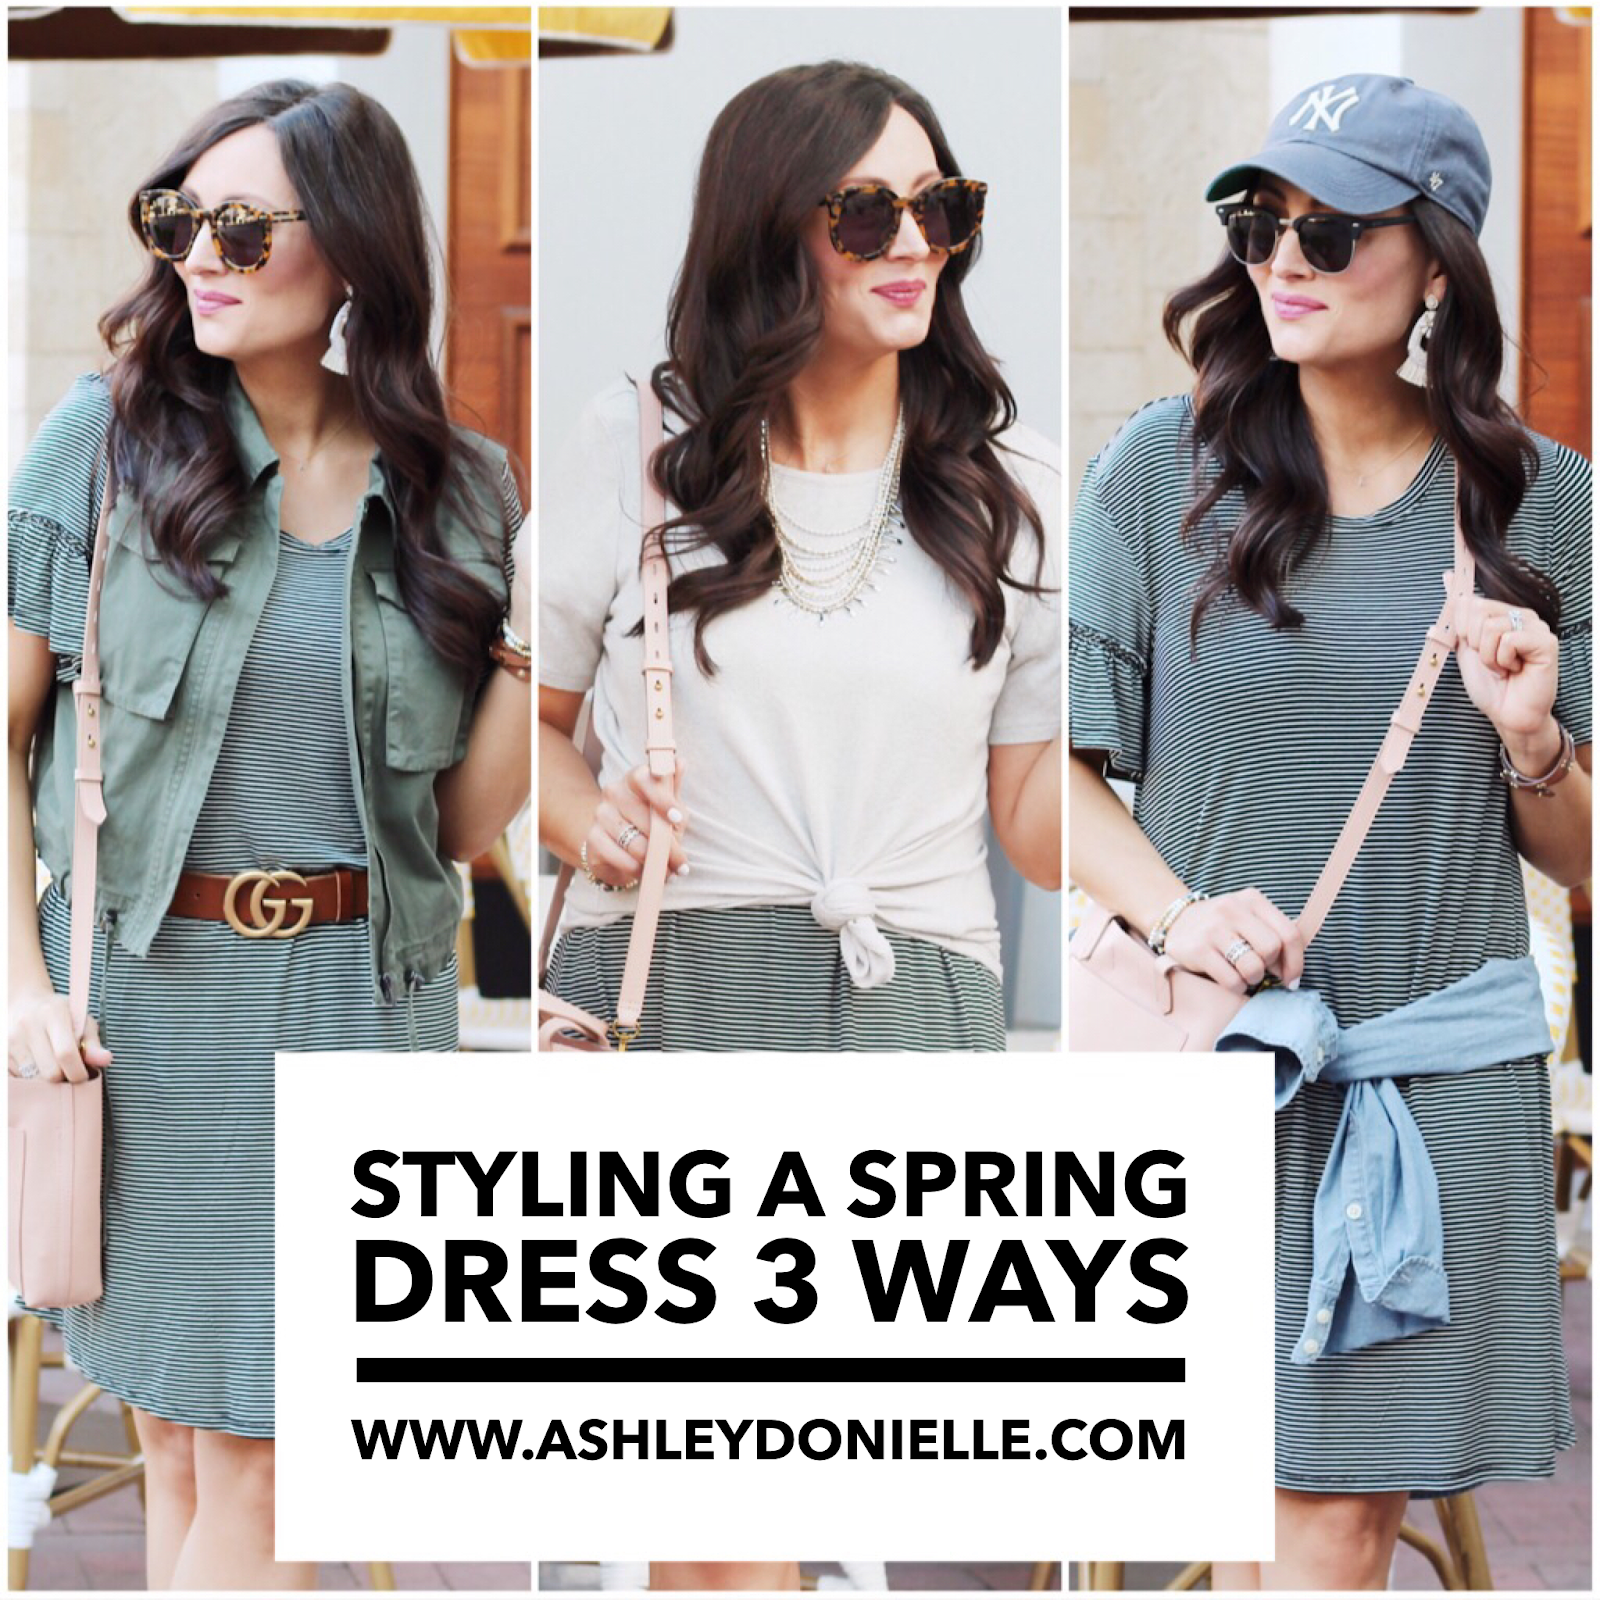 Styling A Spring Dress 3 Ways - Ashley Donielle